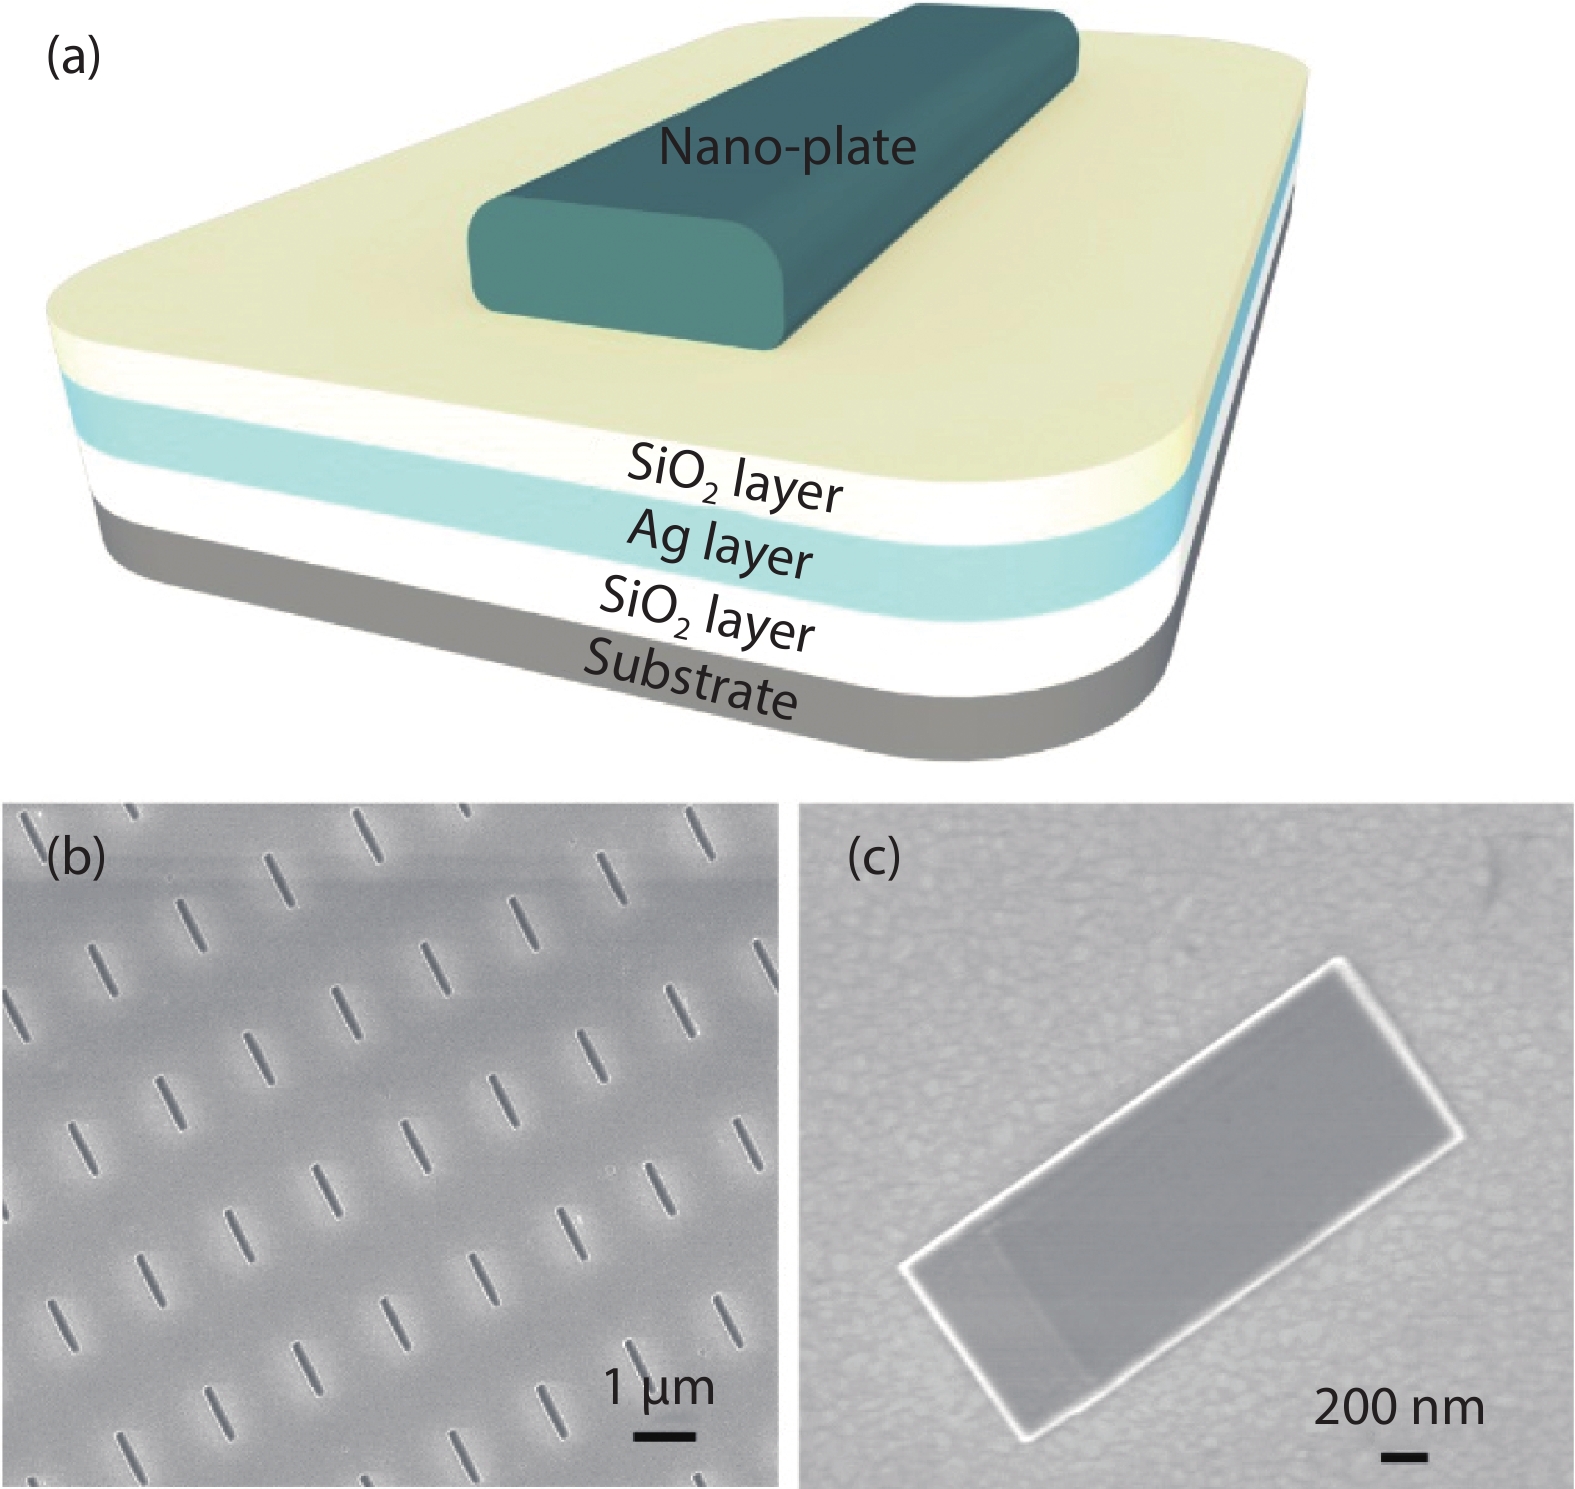 (Color online) (a) Schematic of the nano-plate based SPASER sample, where a thin nano-plate atop silver layer separated by a 10 nm SiO2 gap. (b) SEM image of nano-plate arrays. (c) SEM image of SPASER with single nano-plate (200 nm in width, 1 μm in length, 3μm in height).